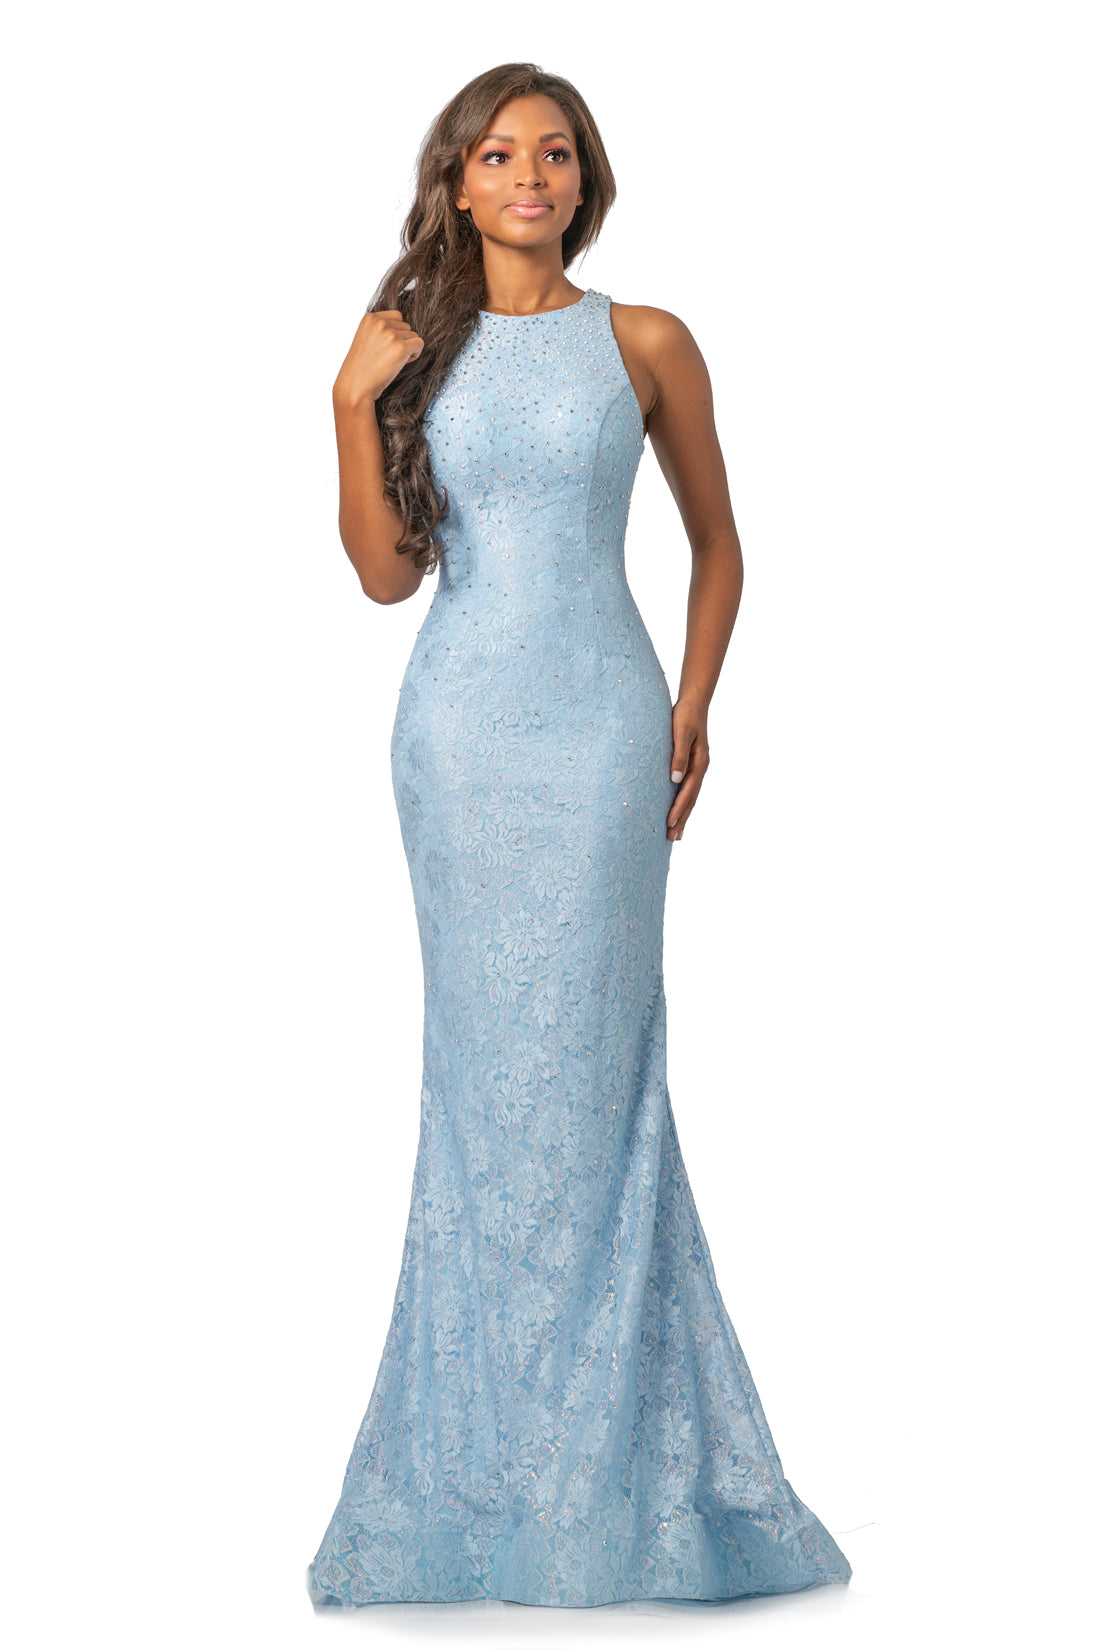 Navy Blue 2pc Halter Prom Pageant Dress with Embroidery and Rhinestones